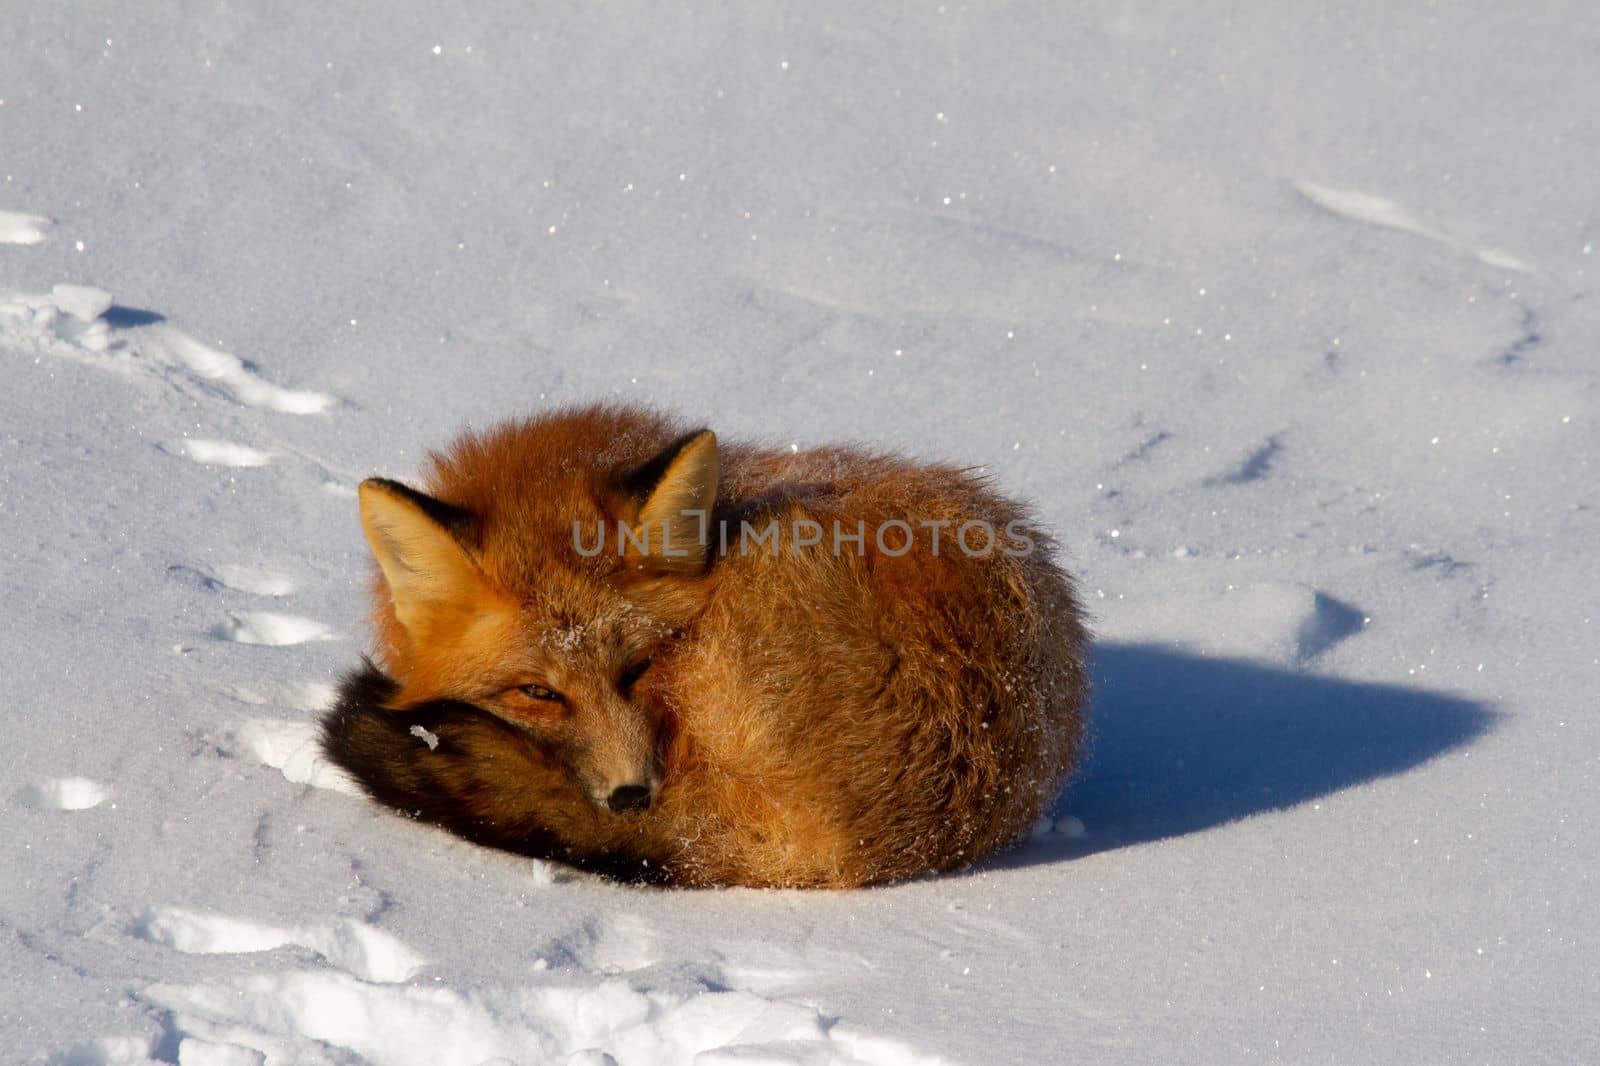 Red fox or Vulpes vulpes curled up in a snowbank near Churchill, Manitoba Canada by Granchinho